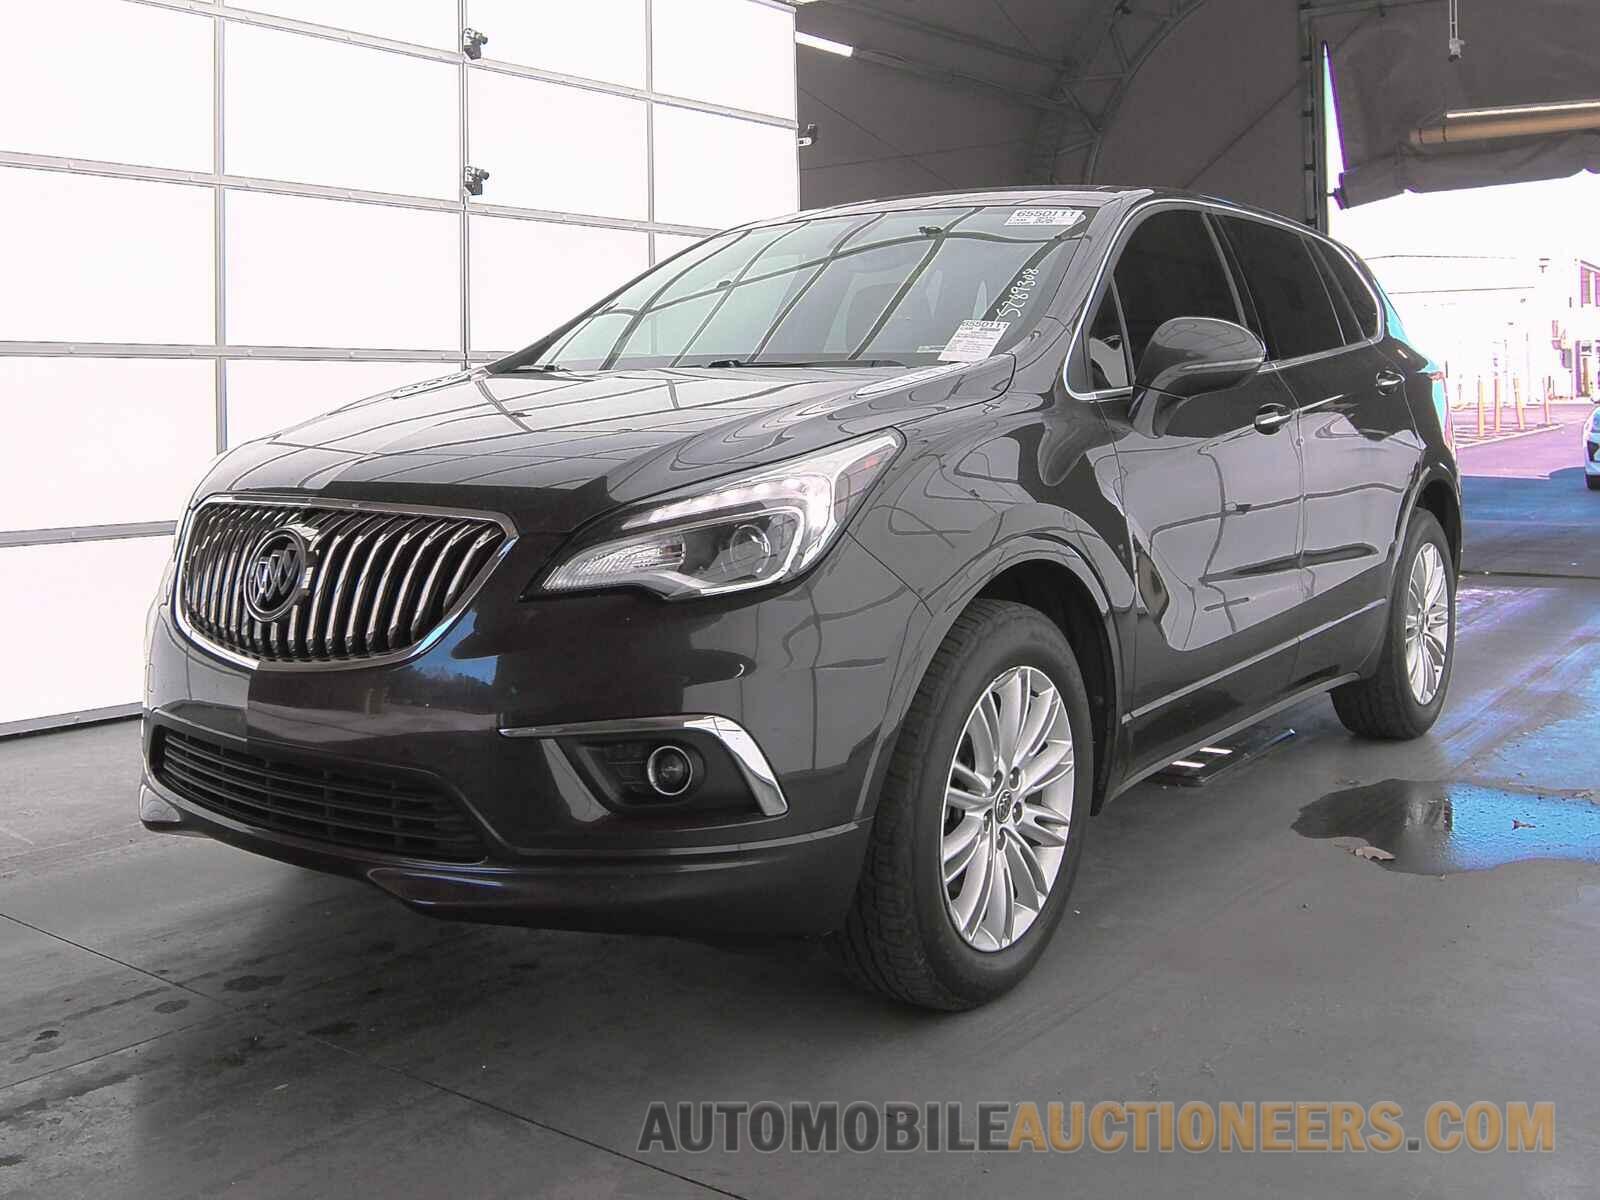 LRBFXBSA6JD052961 Buick Envision 2018